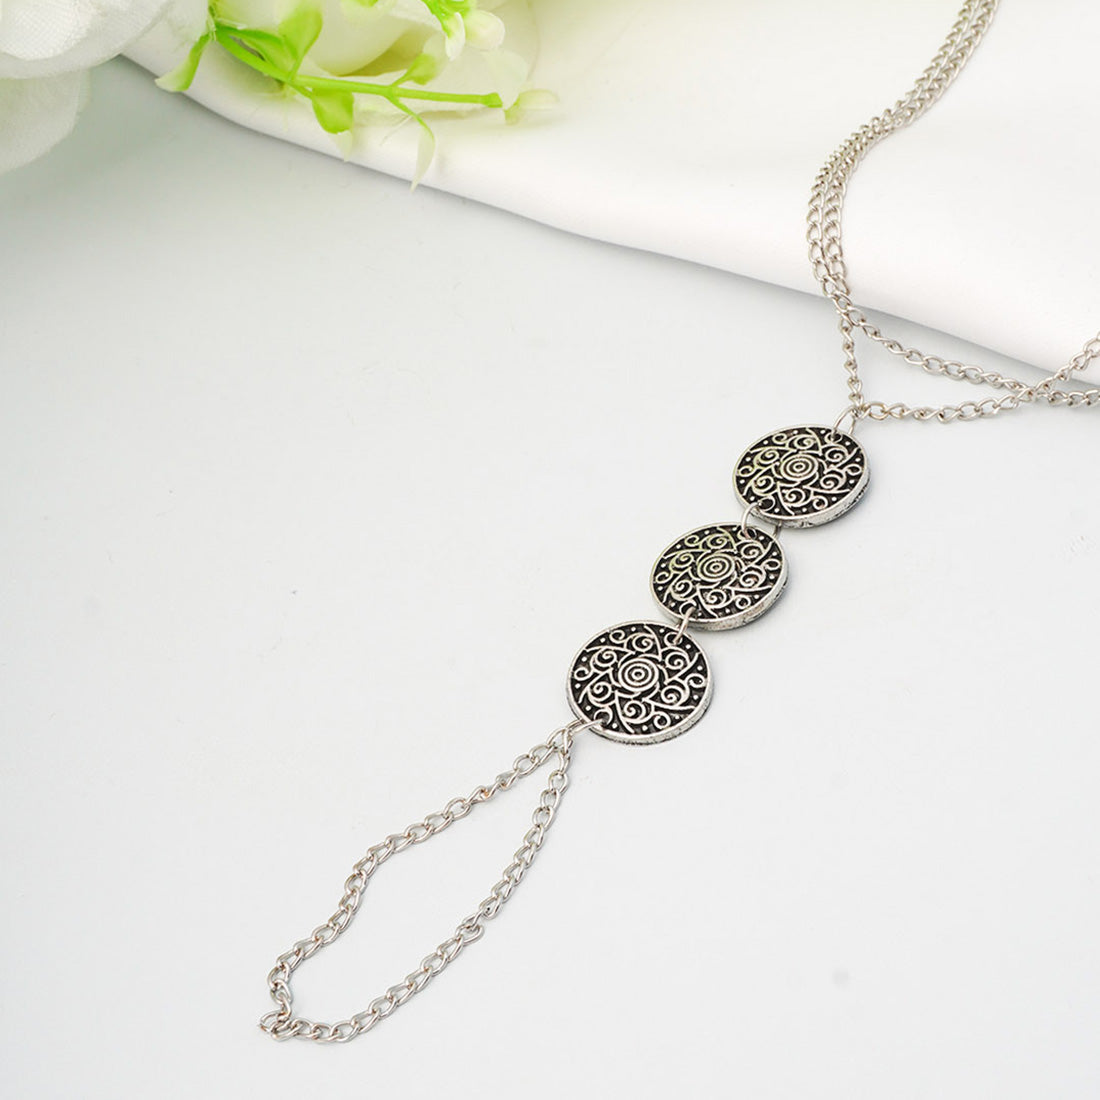 Oxidized Coin Toe Chain Anklet